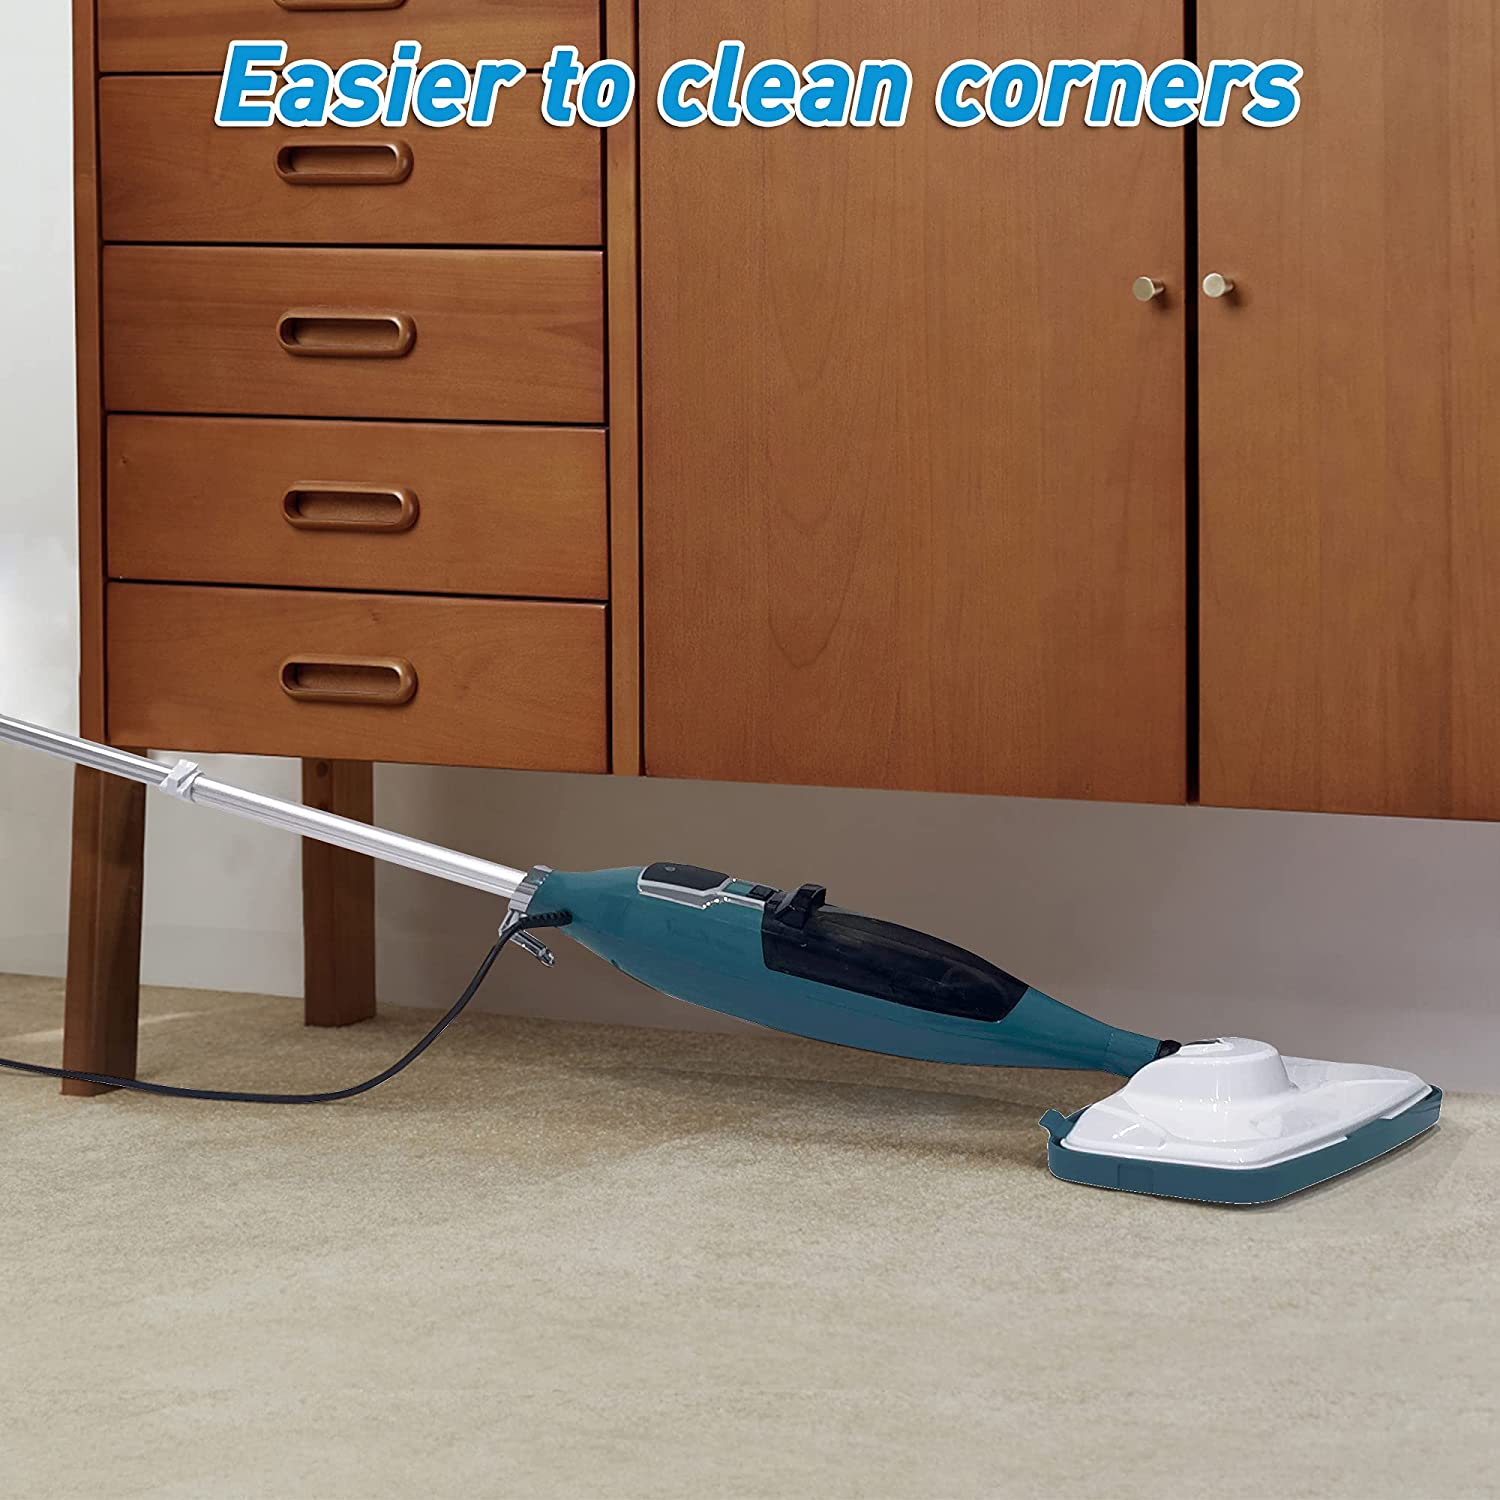 (Out of Stock) Steam Mop with 3 Steam Levels Hard Floor Cleaner, Adjustable Steamer with 550ml Water Tank and 2 Microfiber Pads